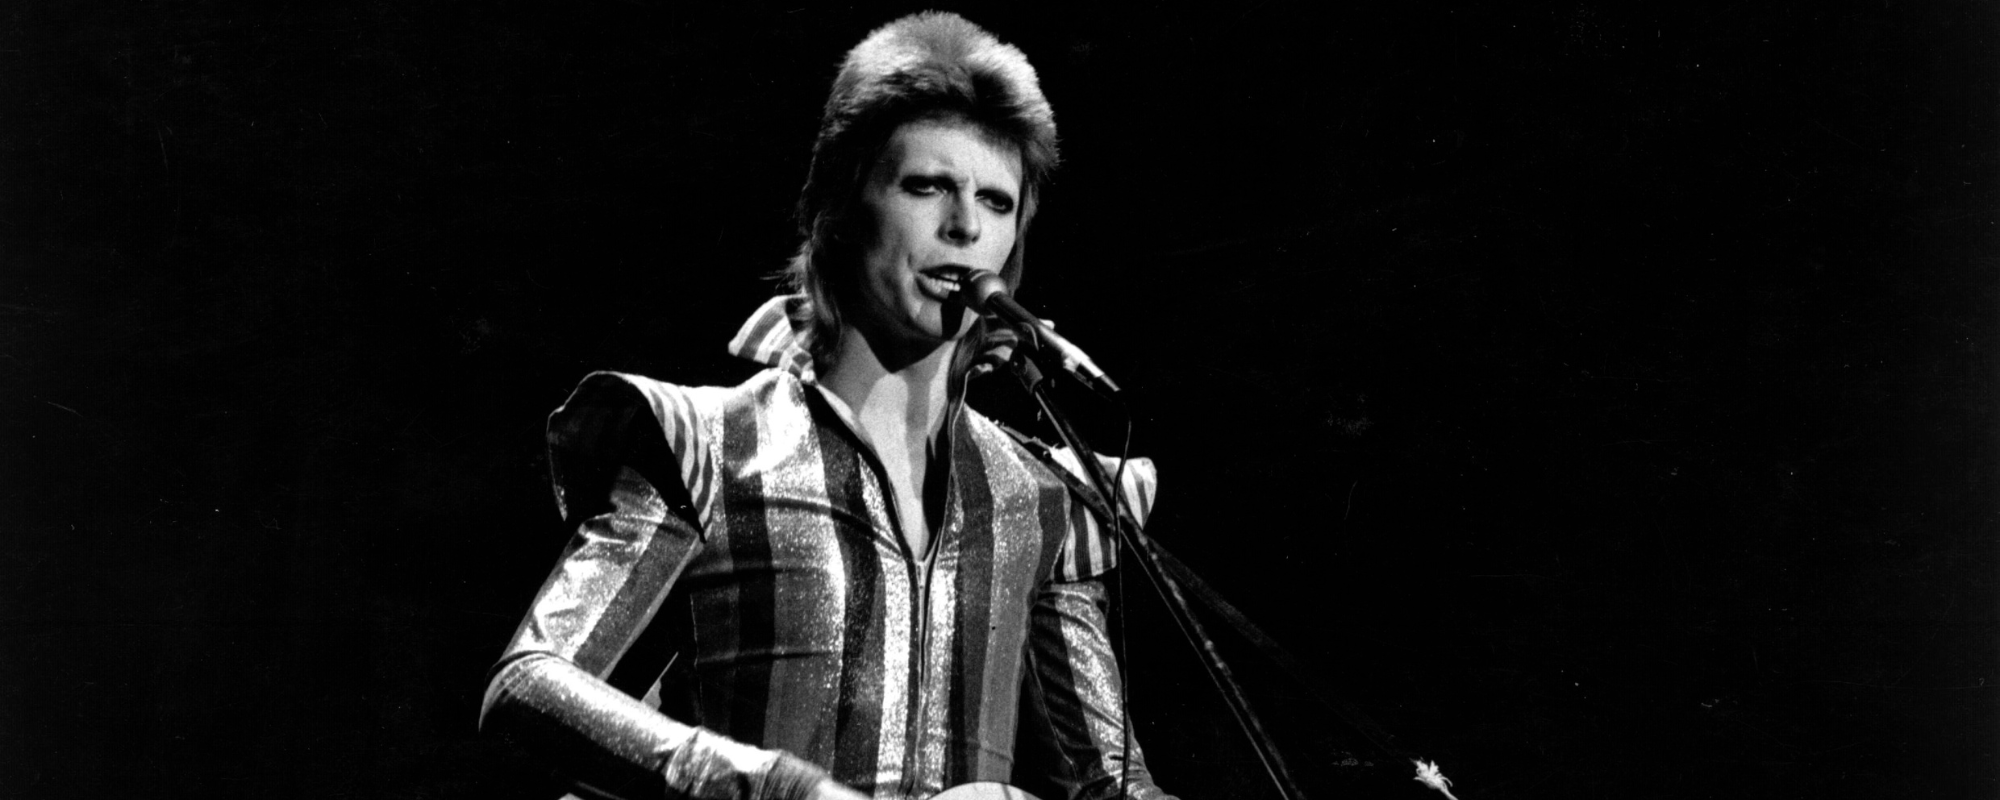 3 Musicians That Disliked David Bowie